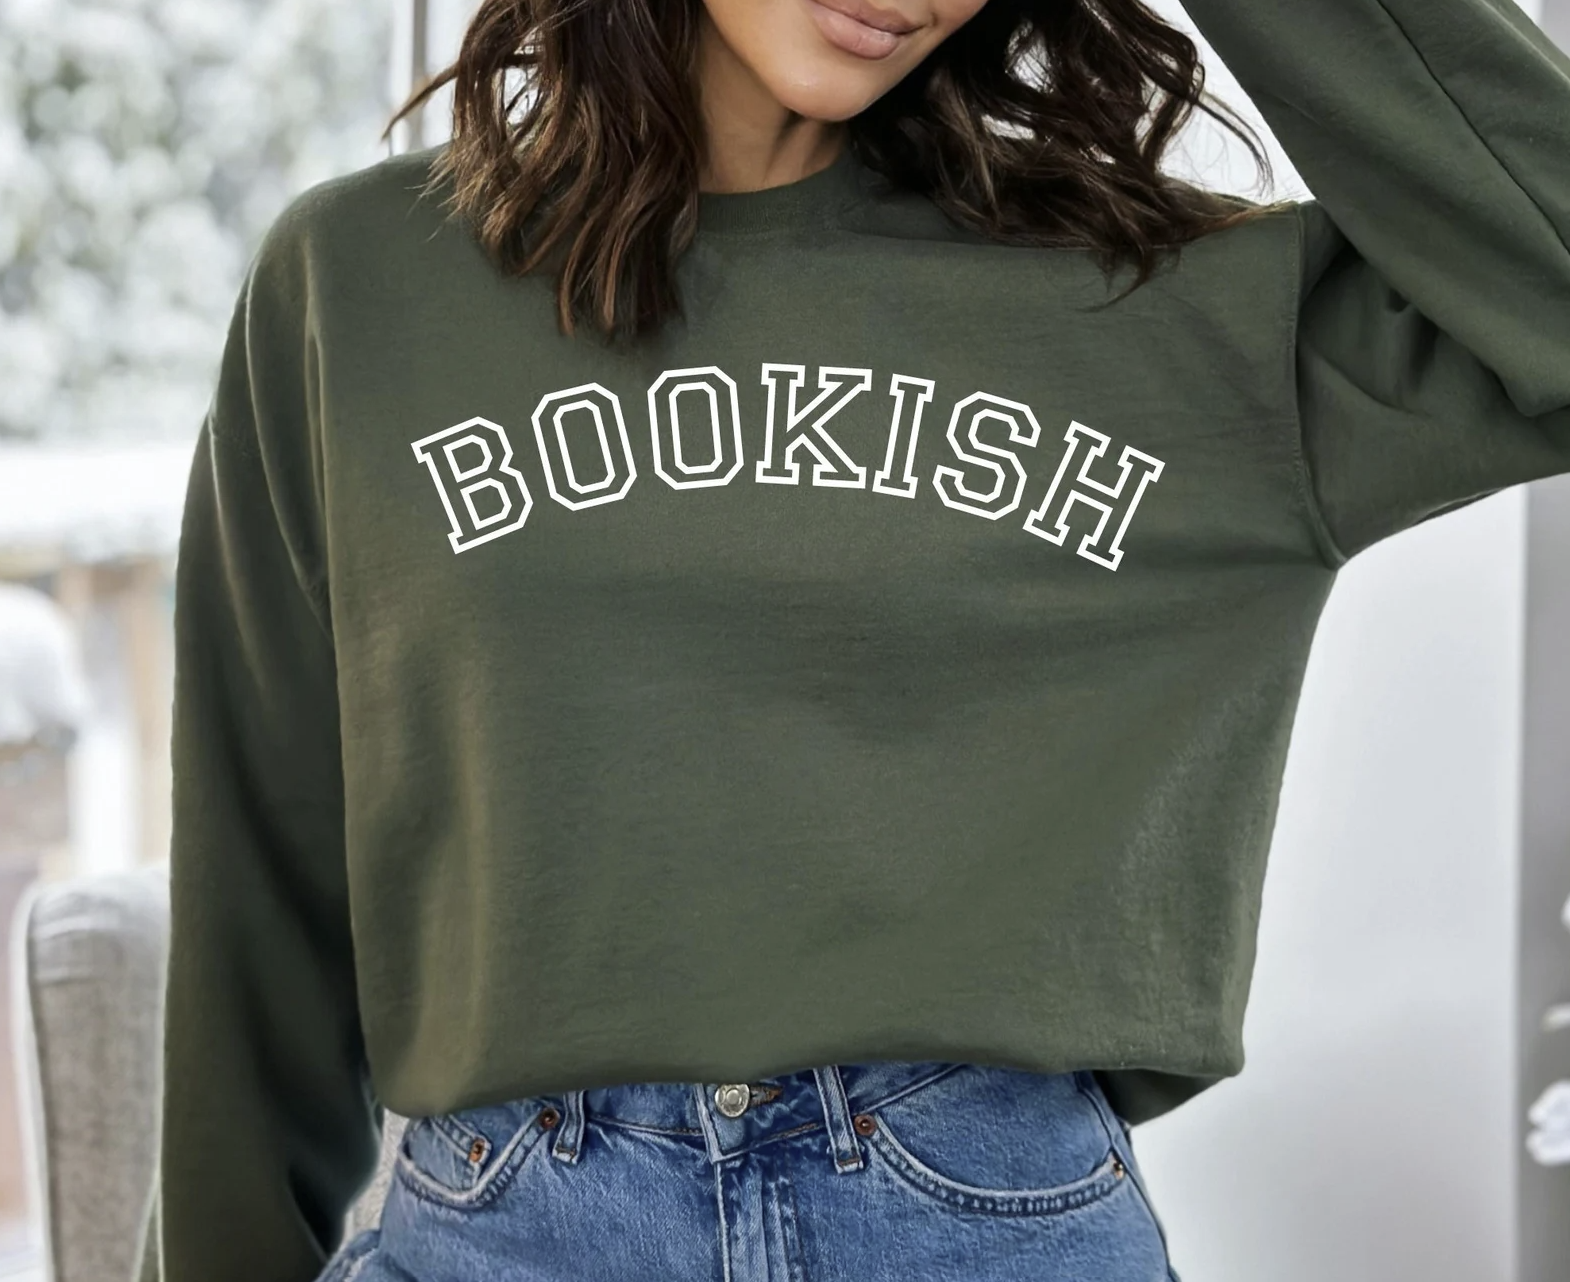 Woman wearing a forest green sweatshirt with white outlined text reading "Bookish" 